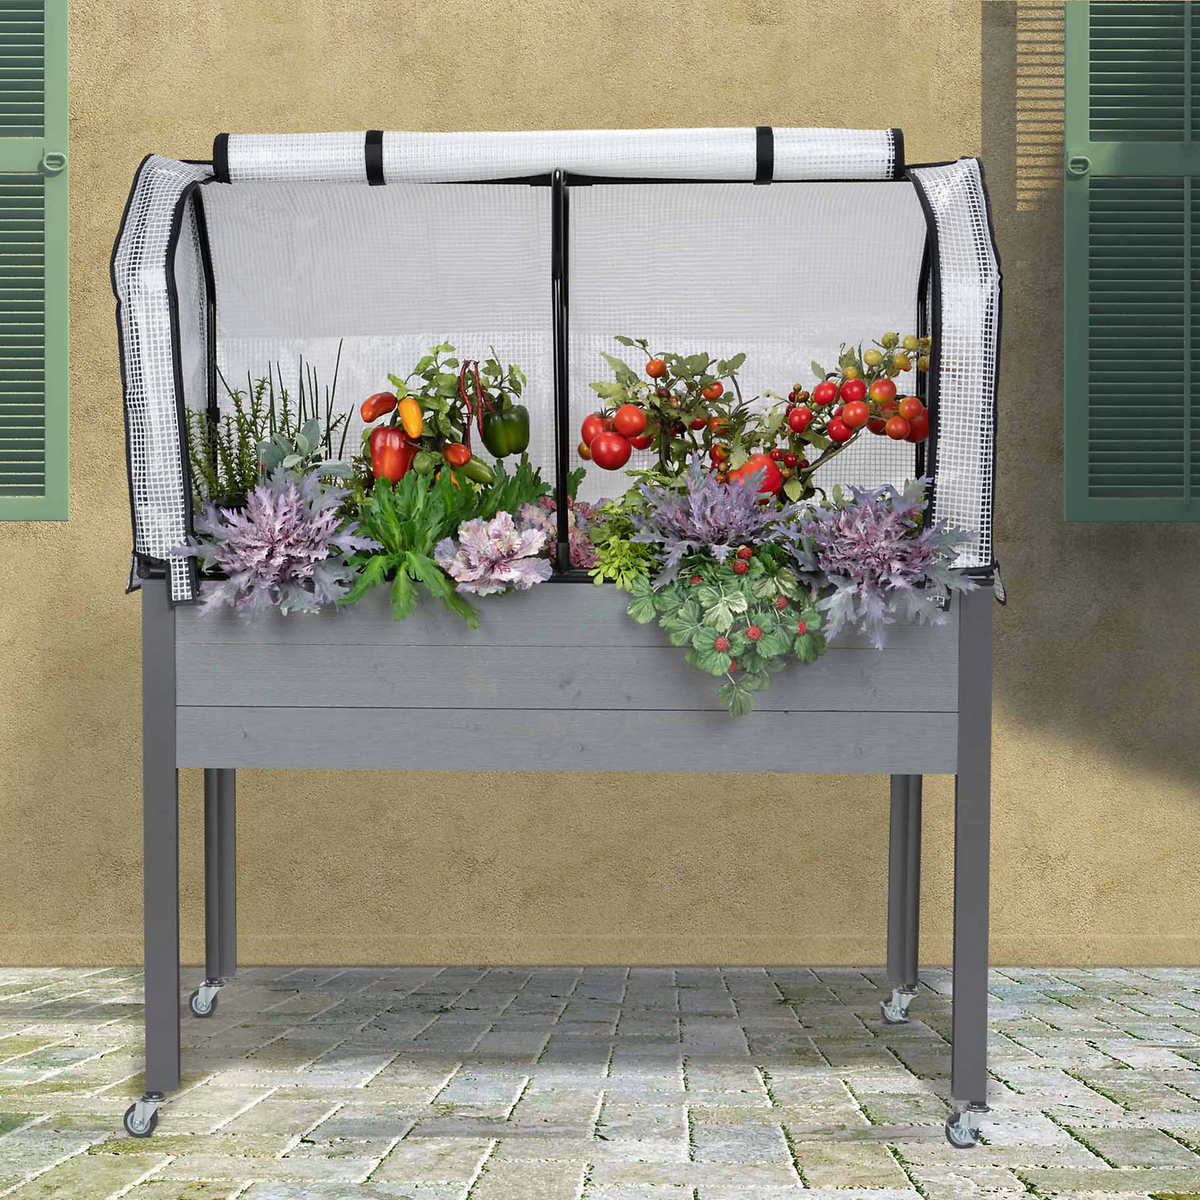 Patio Raised Garden Bed Planter Self-Watering Rolling Gray Grey System Vegetable 